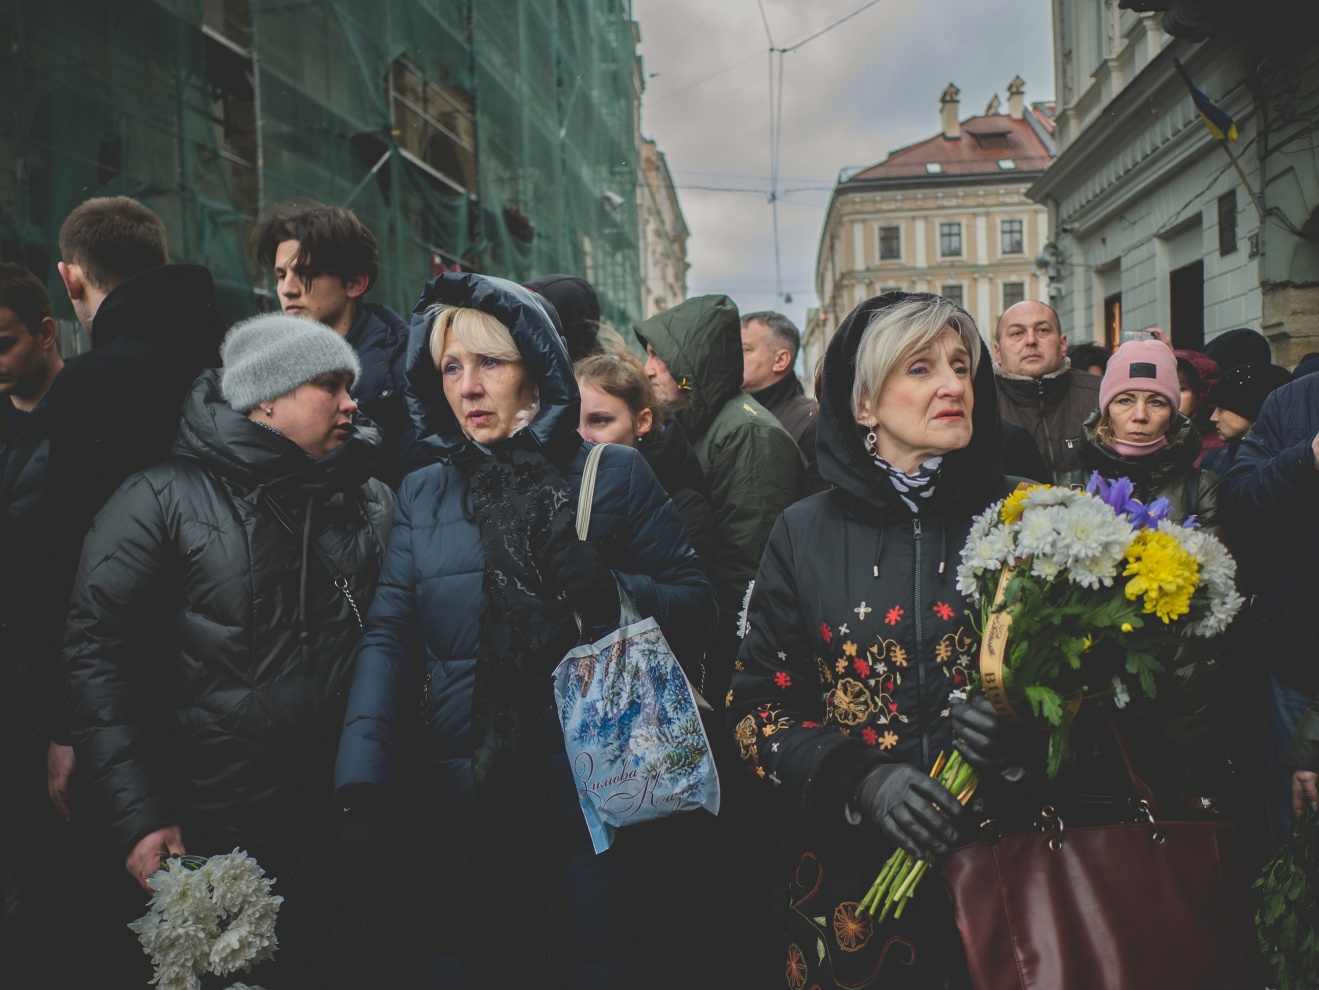 003_brokenpromises - Ukraine; Lviv; 2022

Lviv inhabitants at the funeral out of the church of Apostles Peter and Paul in the city centre of Lviv. 
3 soldiers of the 80th brigade were killed in Mykolaiv region. 
